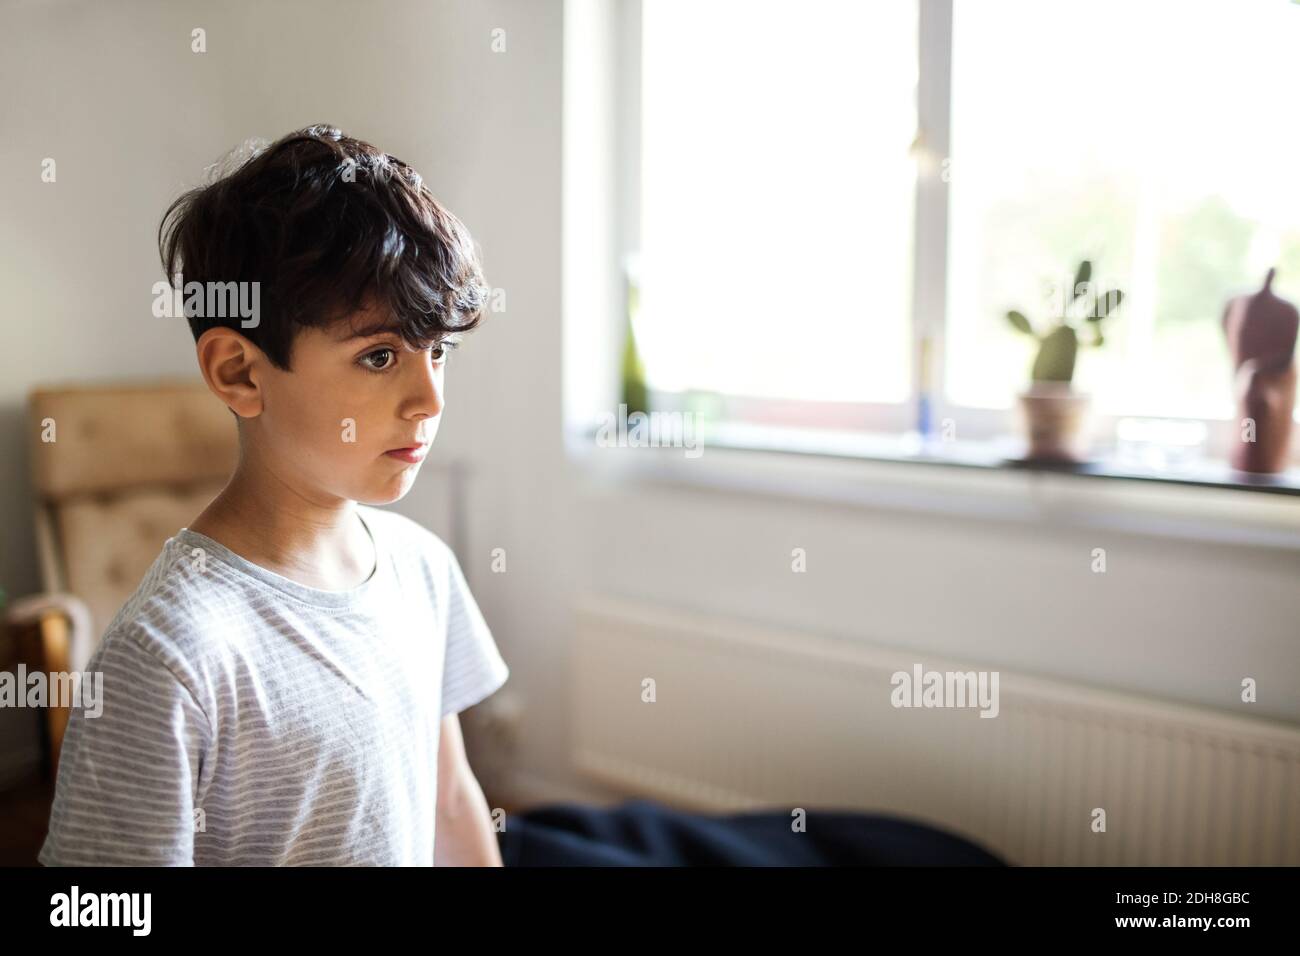 Thoughtful boy standing by window at home Stock Photo